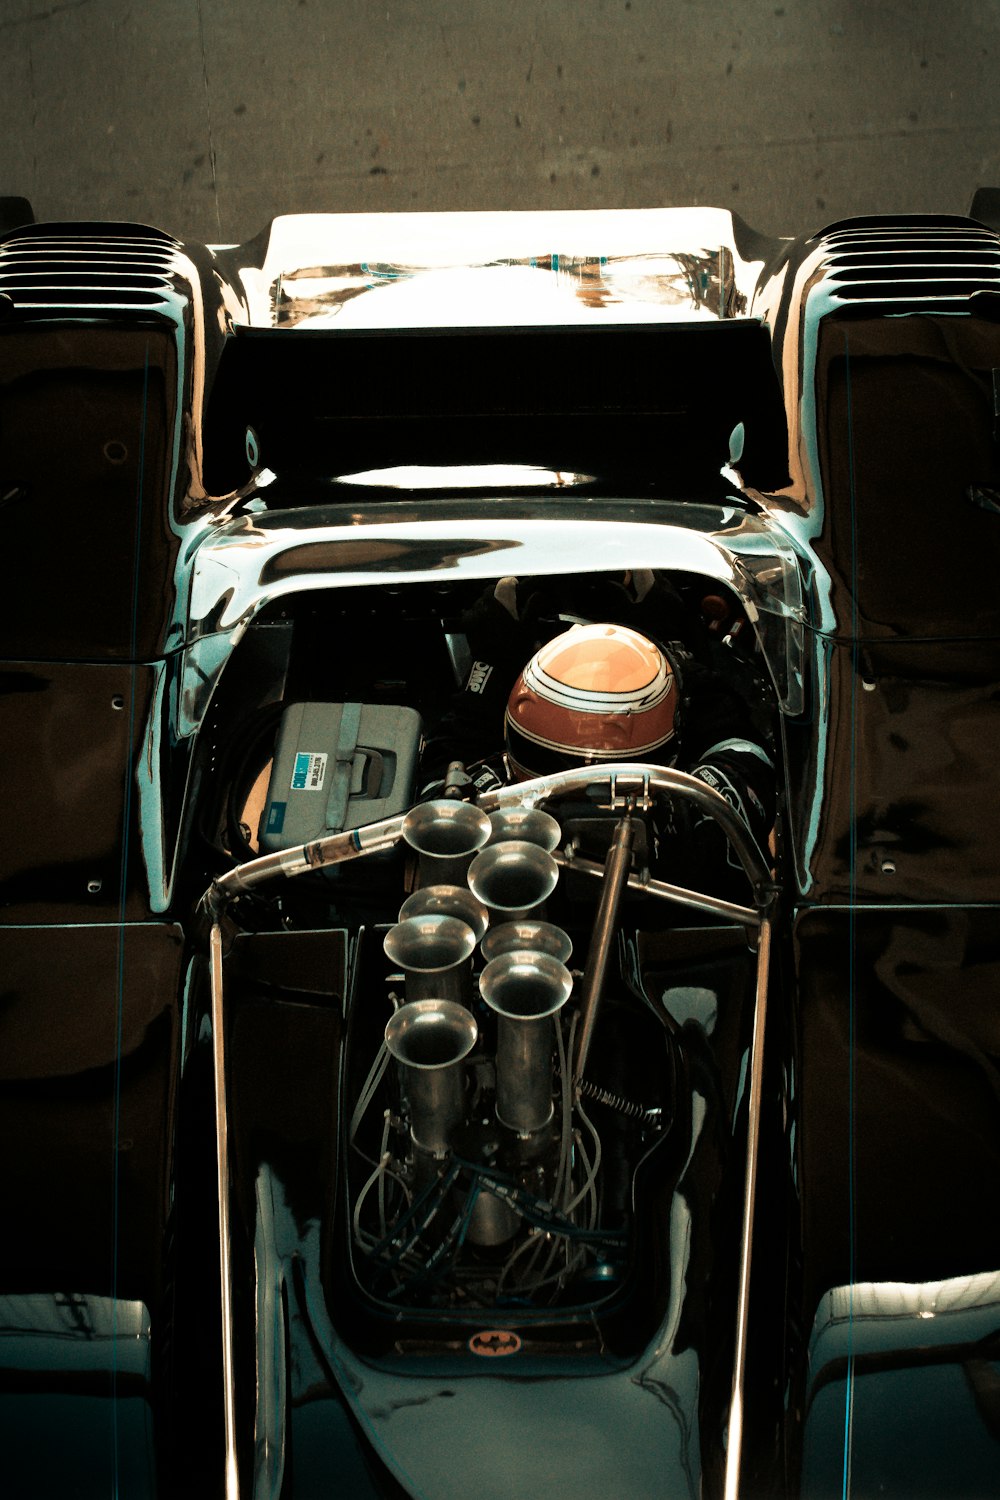 a close up of the engine of a classic car